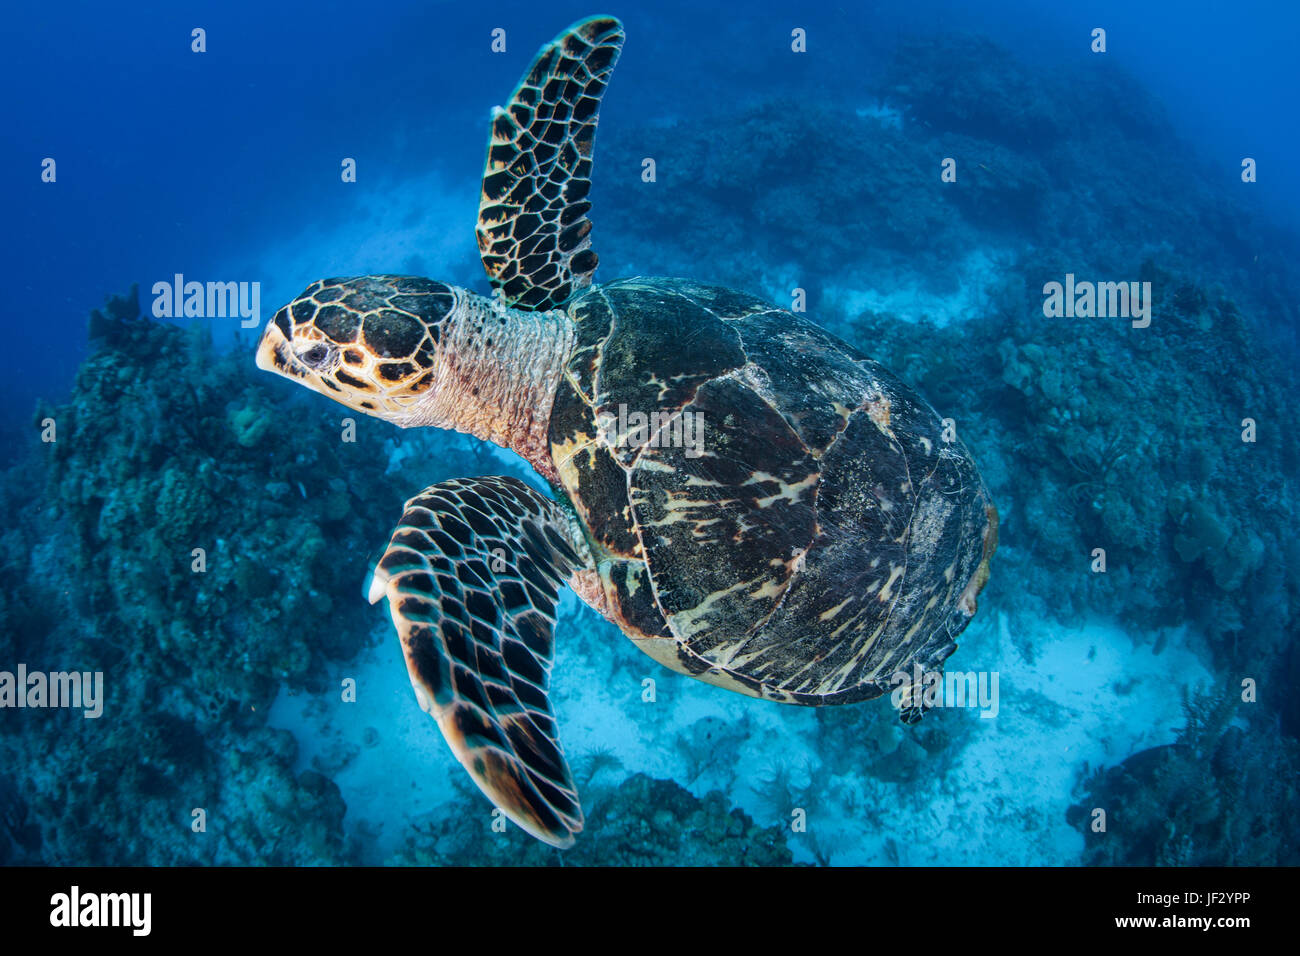 A Hawksbill sea turtle swims in the clear, blue water of the Caribbean Sea off the coast of Belize. This is an endangered species. Stock Photo